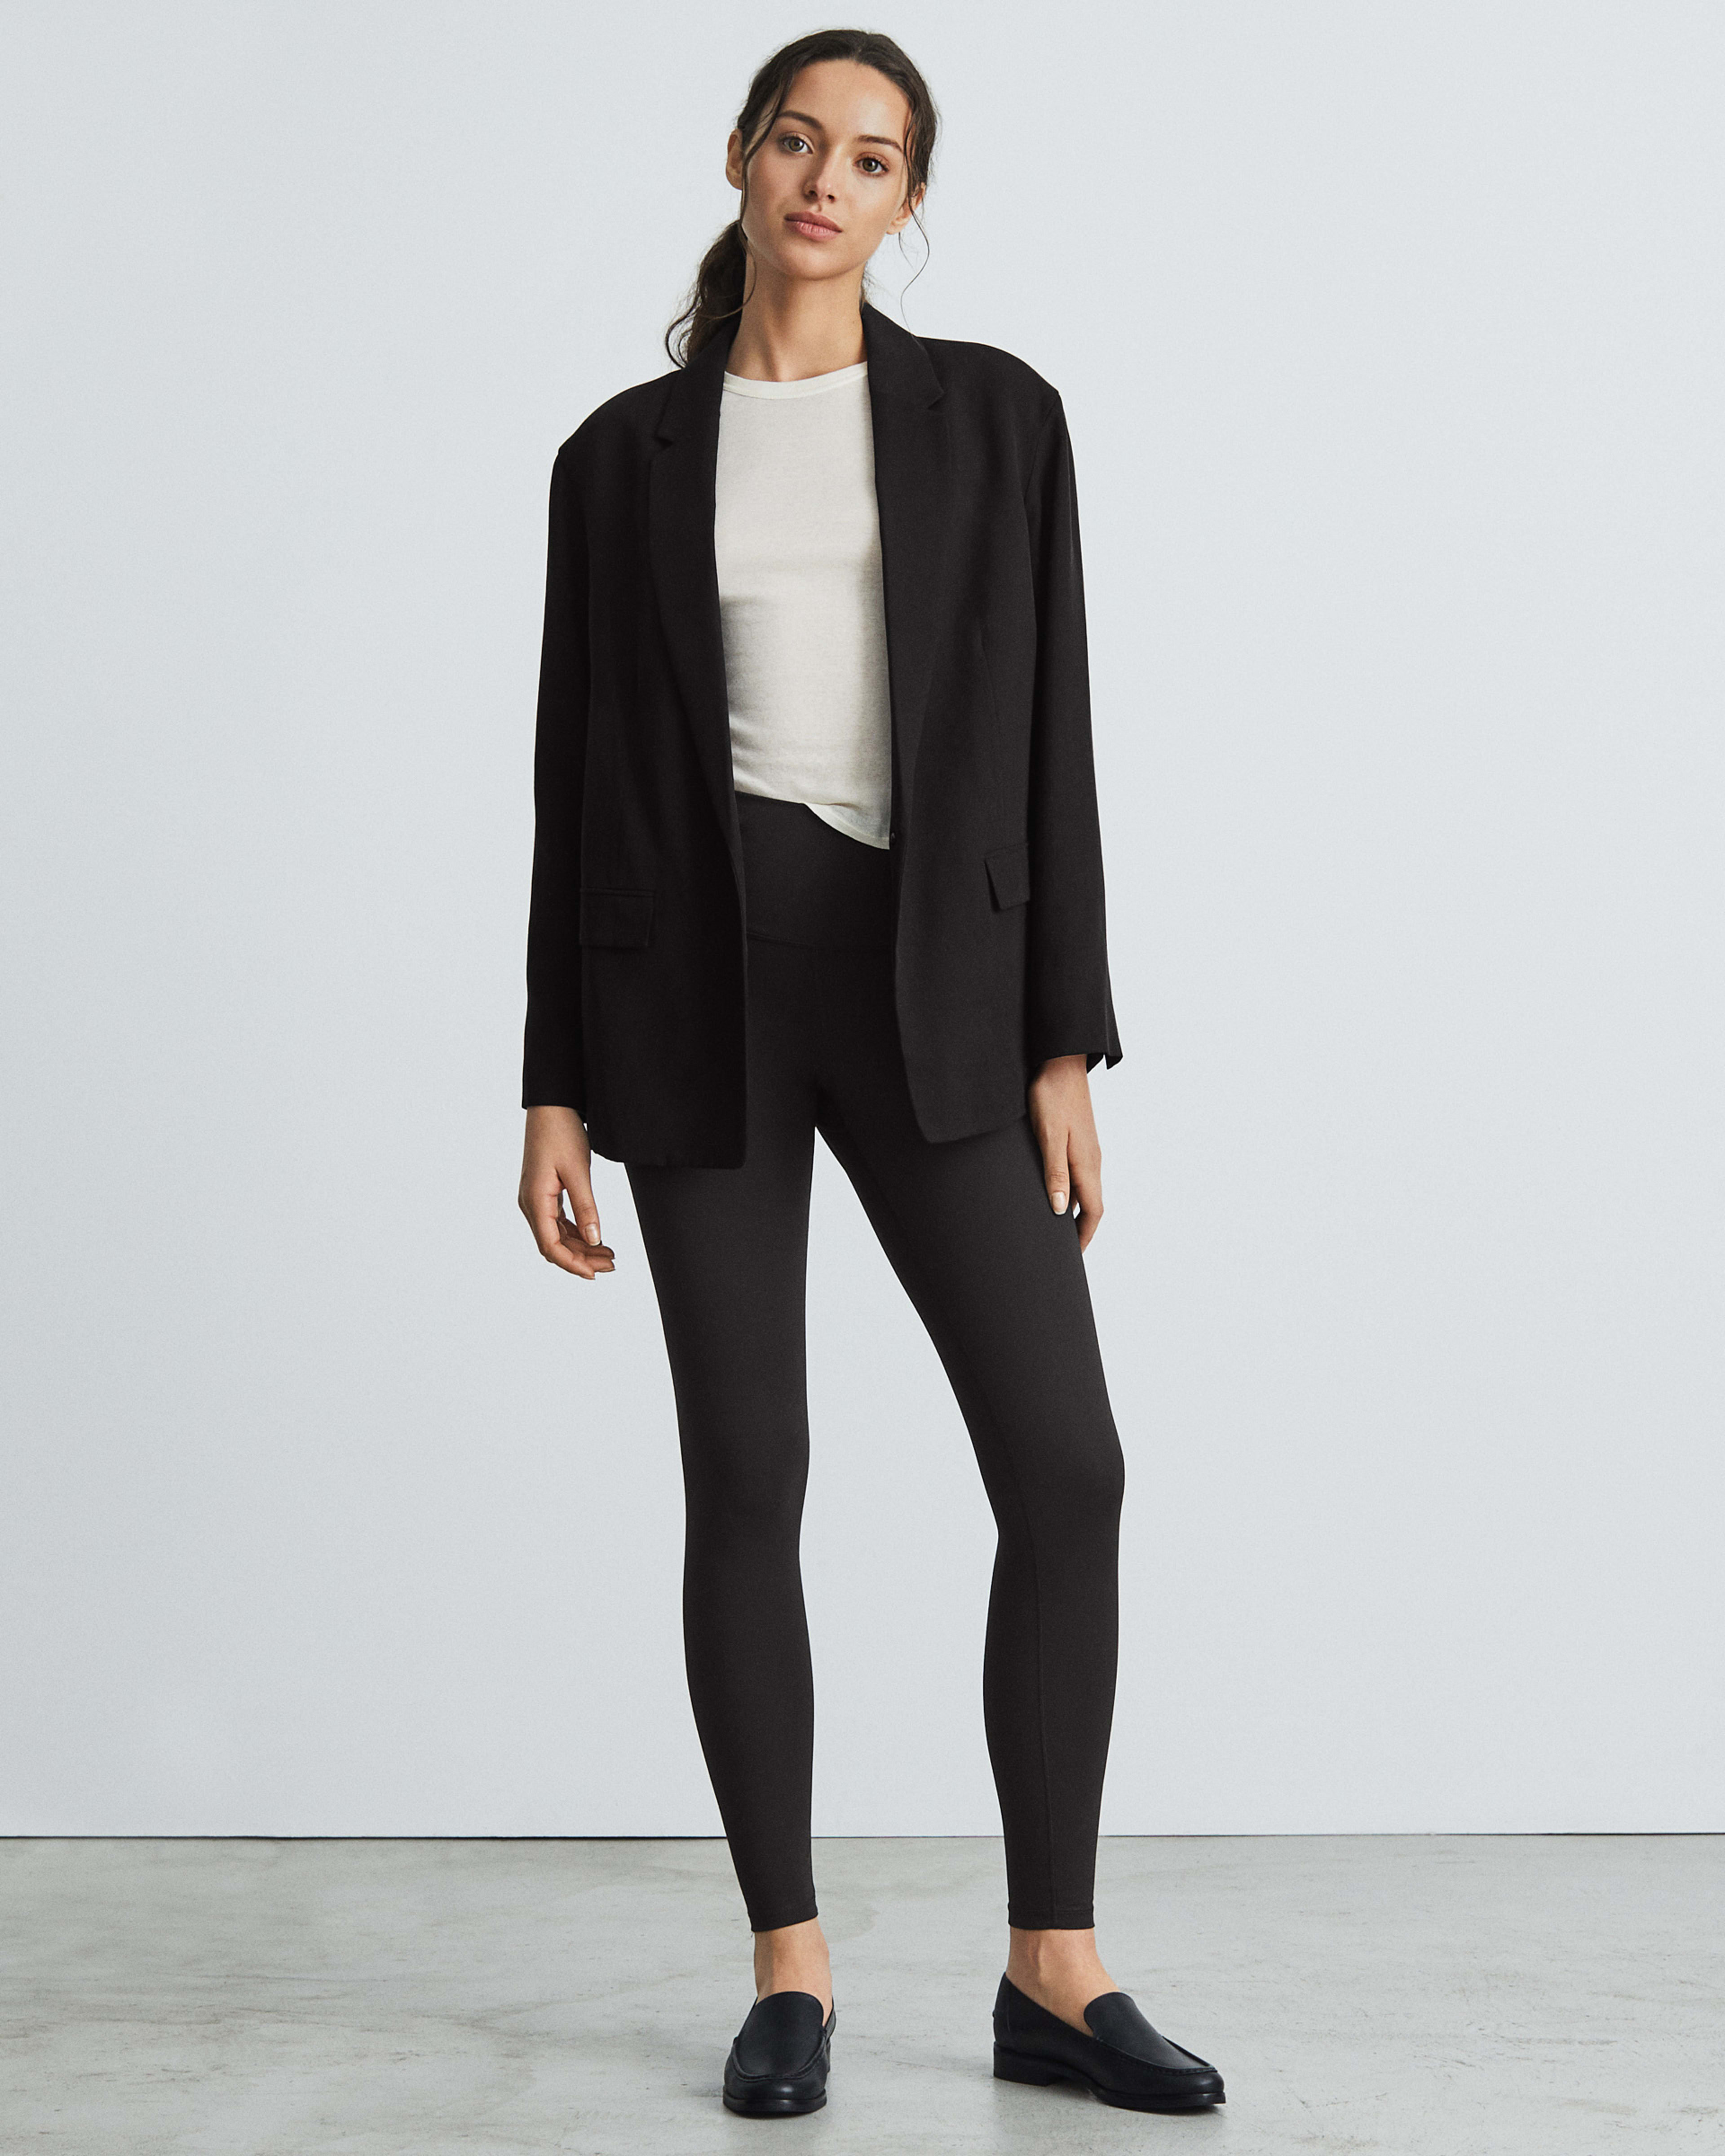 Everlane's leggings are finally here and you won't believe the